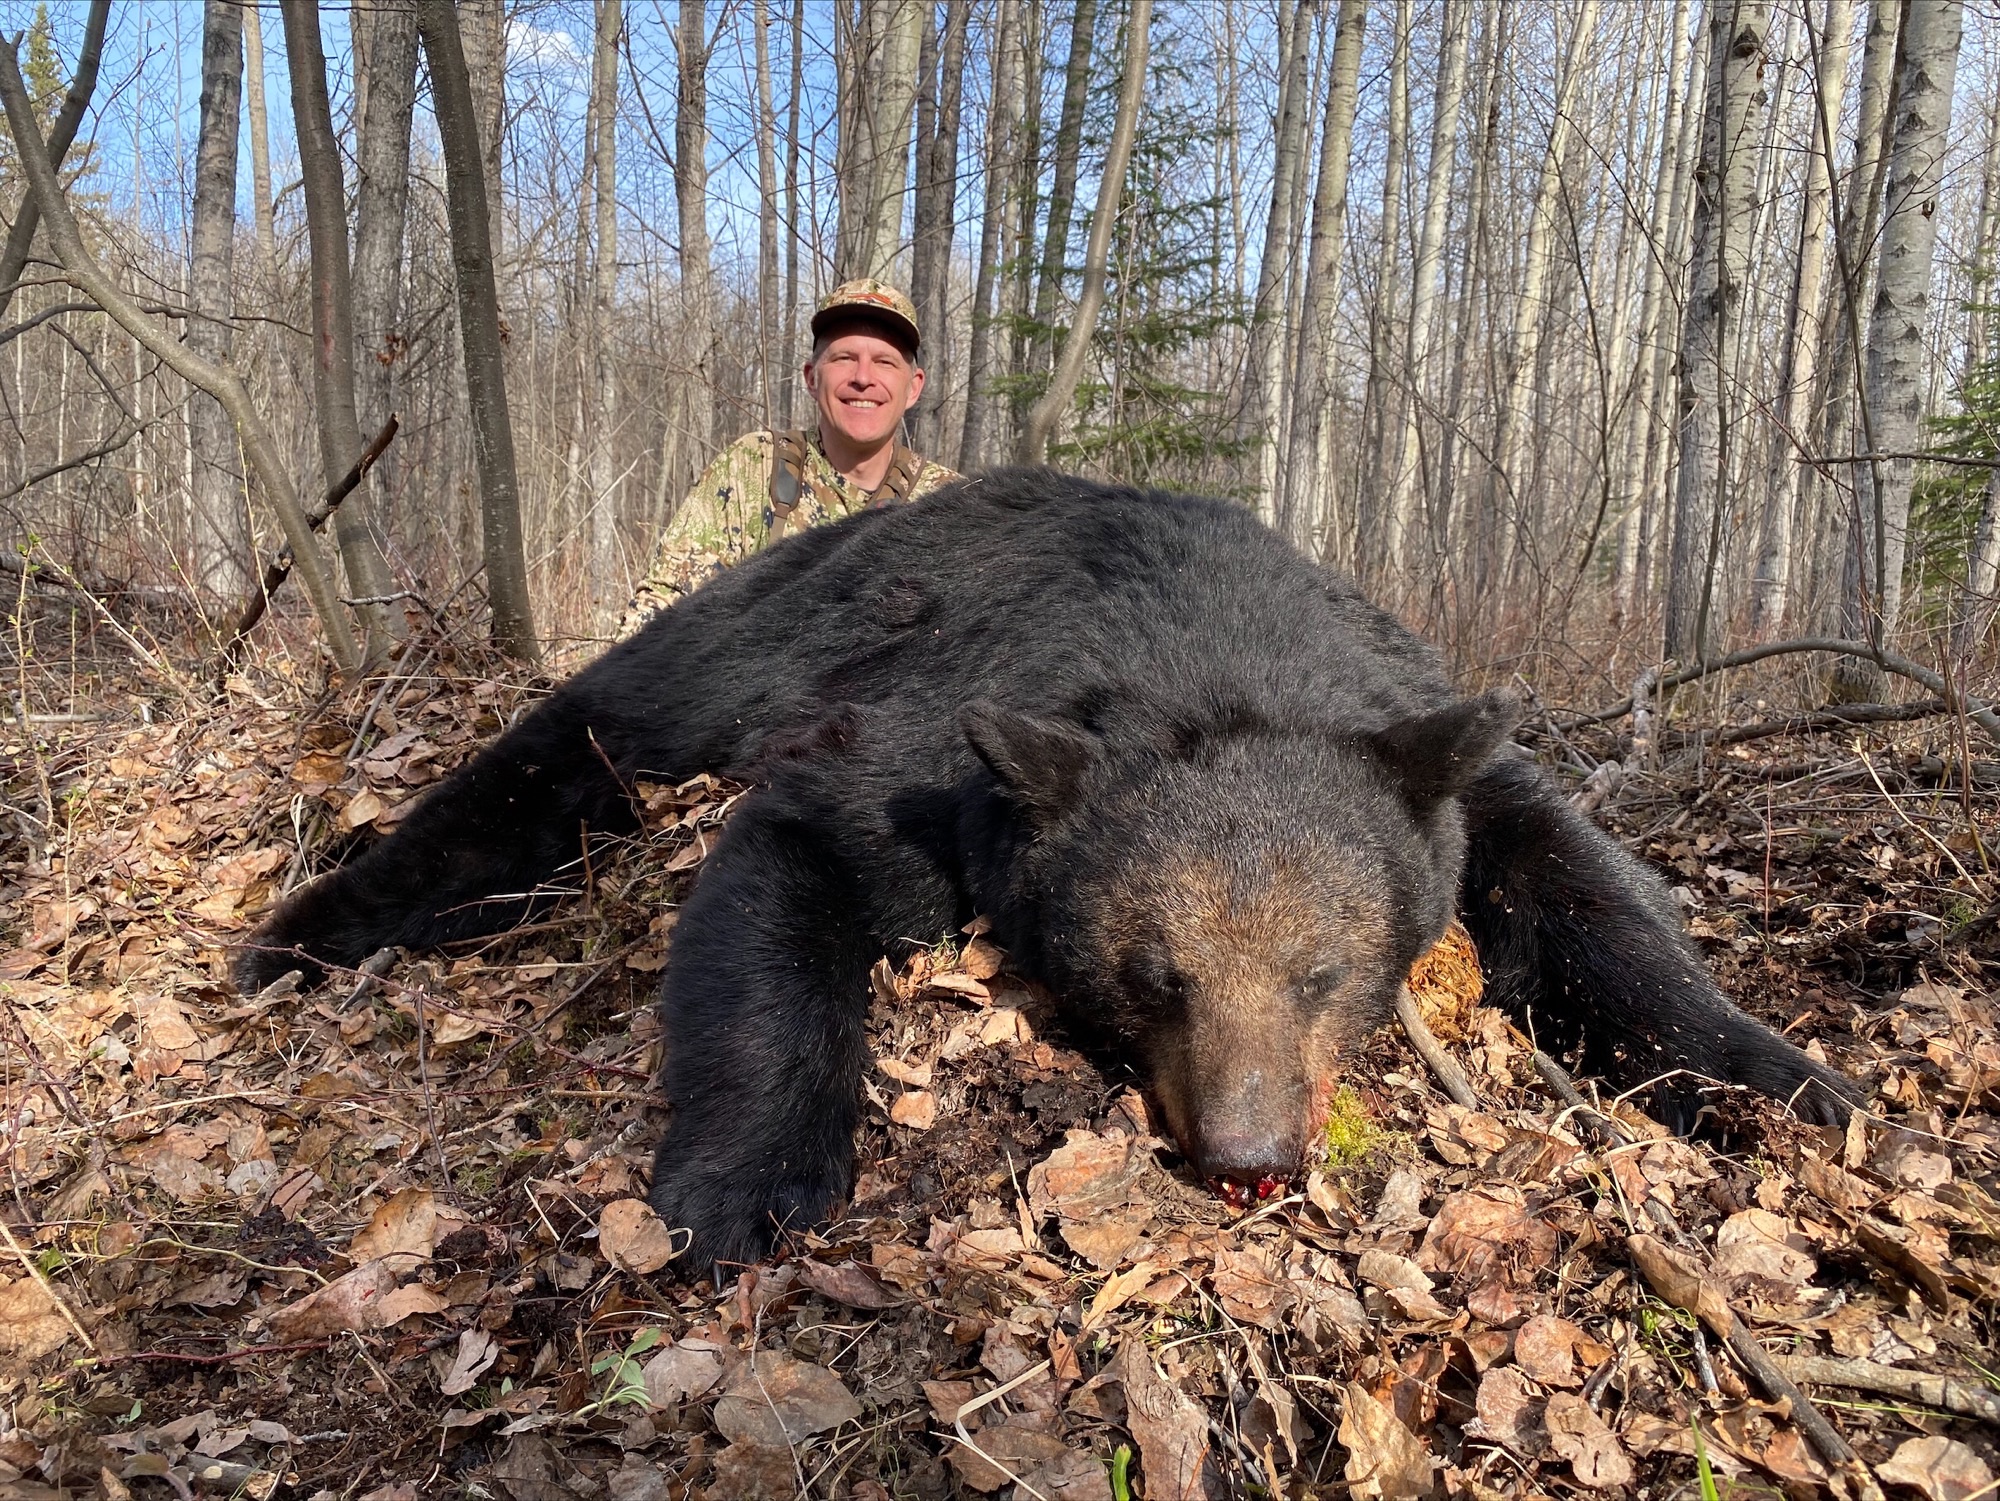 northernedgeoutfitting.bear.(13)